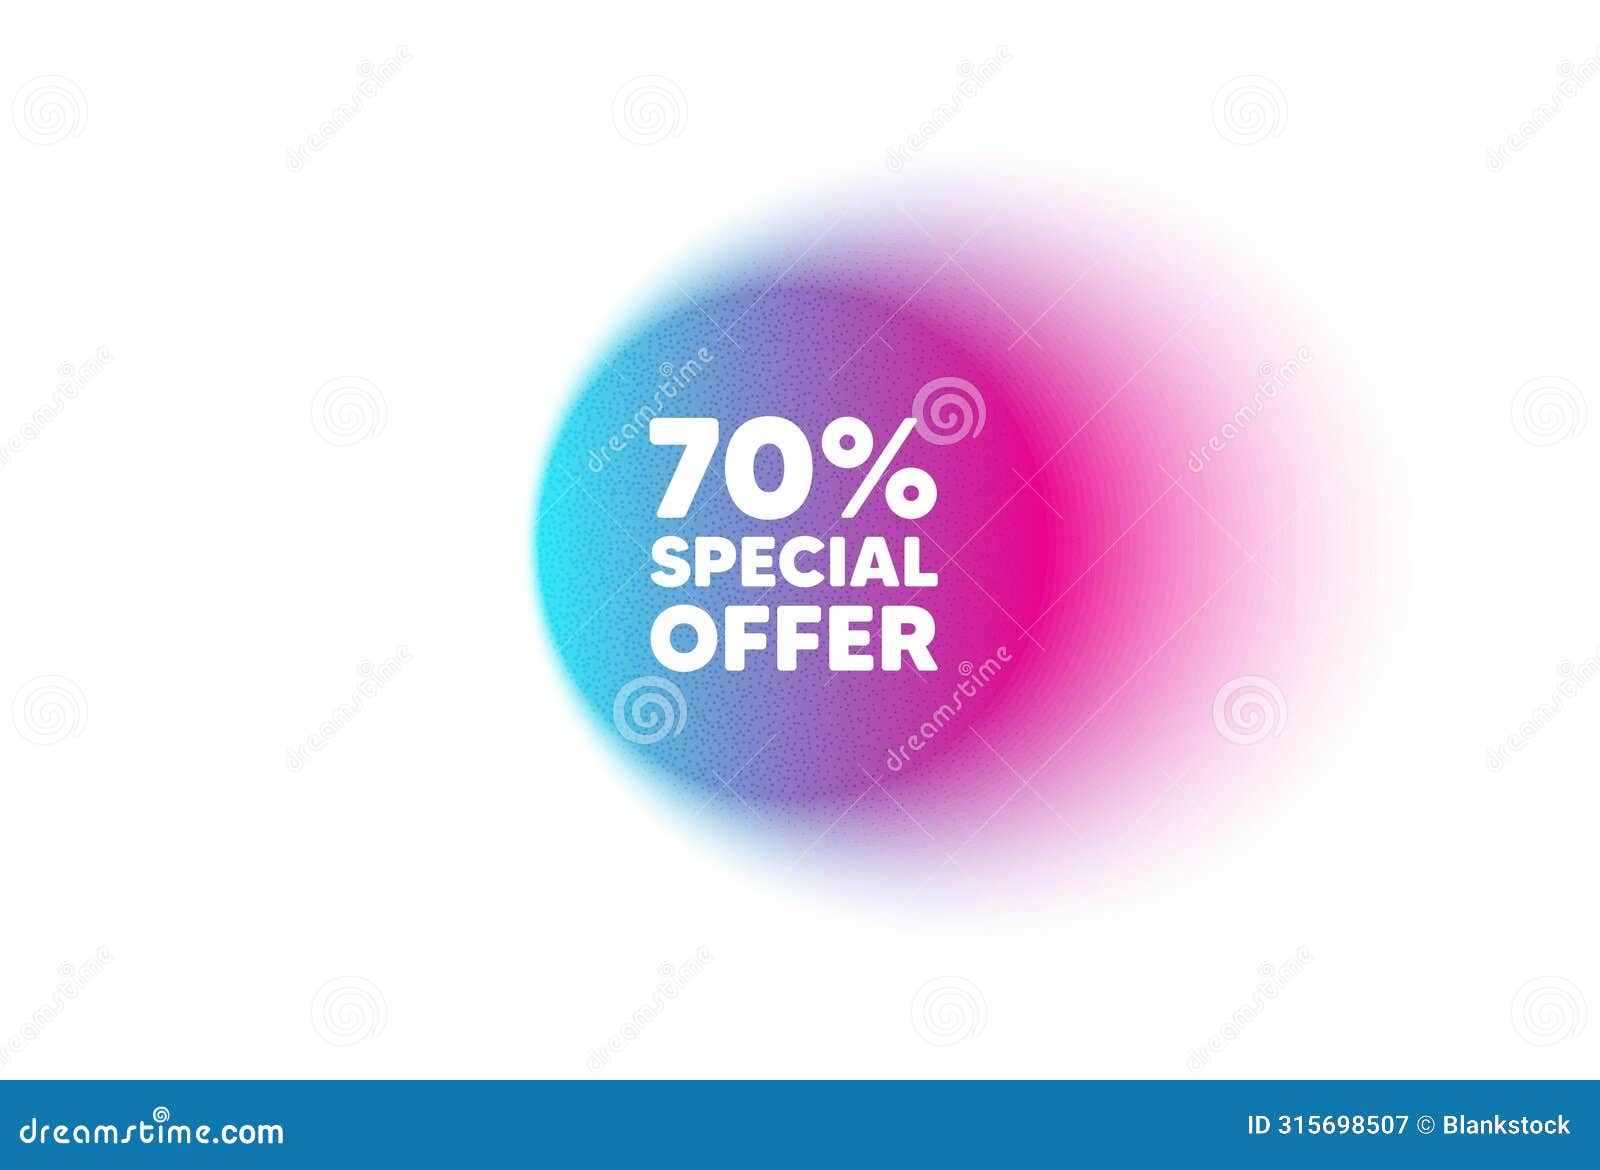 70 percent discount offer. sale price promo sign. color neon gradient circle banner. 